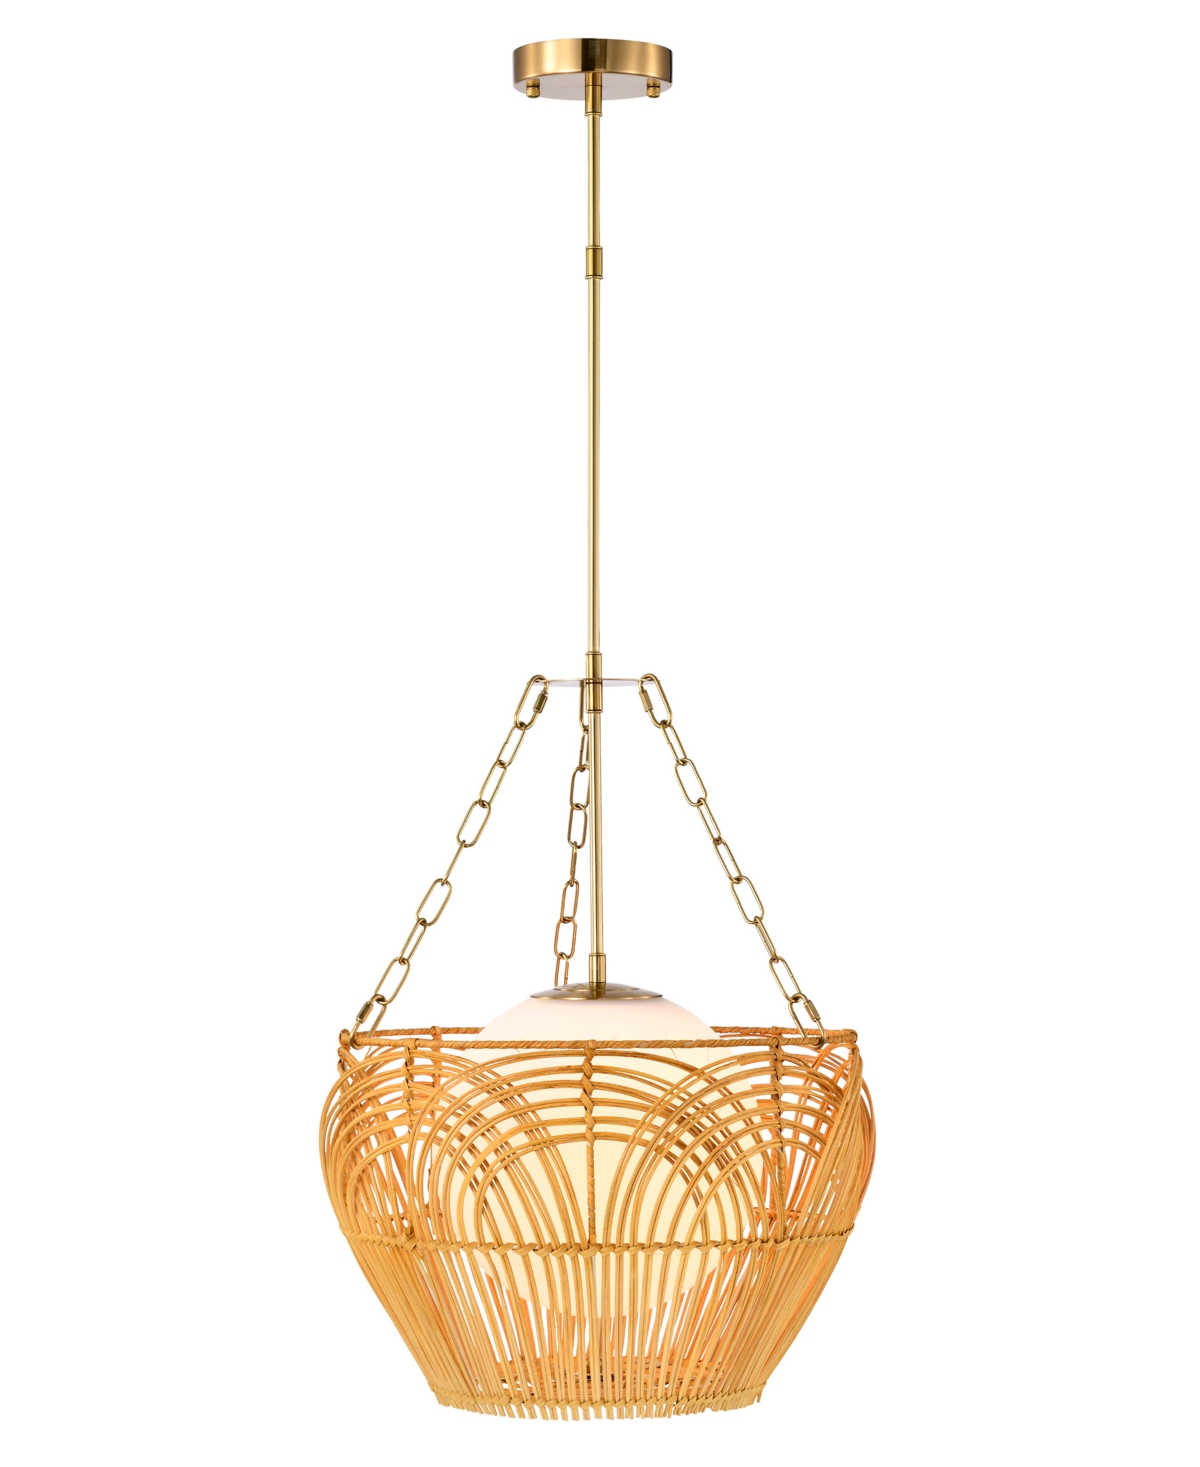 Home Accessories Caddie 15" Indoor Finish Pendant With Light Kit In Brass And Woven Rattan